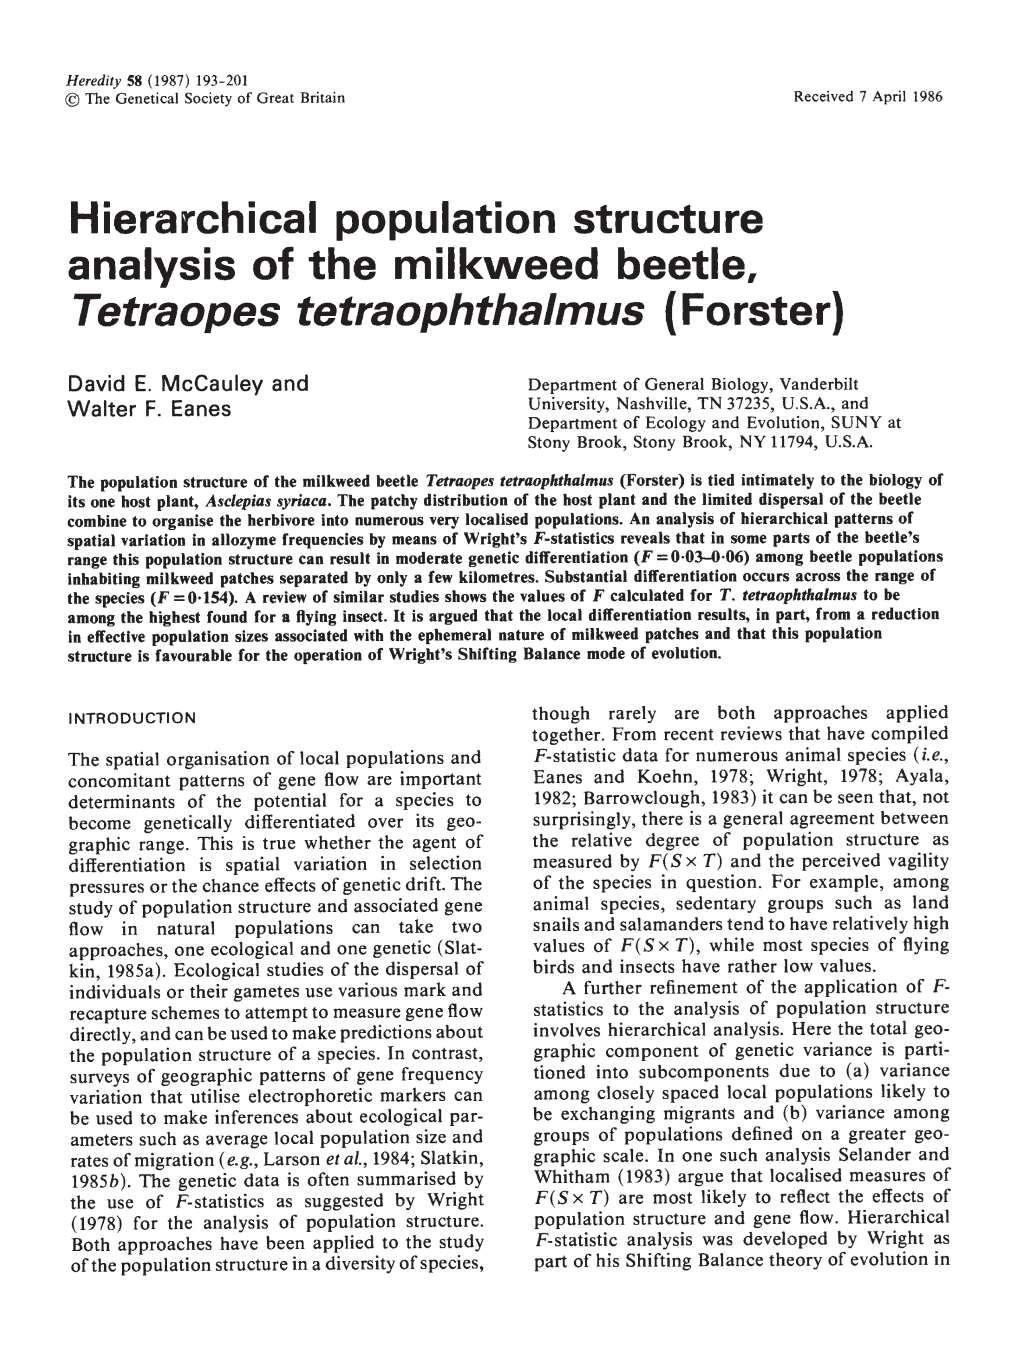 Hierarchical Population Structure Analysis of the Milkweed Beetle, Tetraopes Tetraophthalmus (Forster)